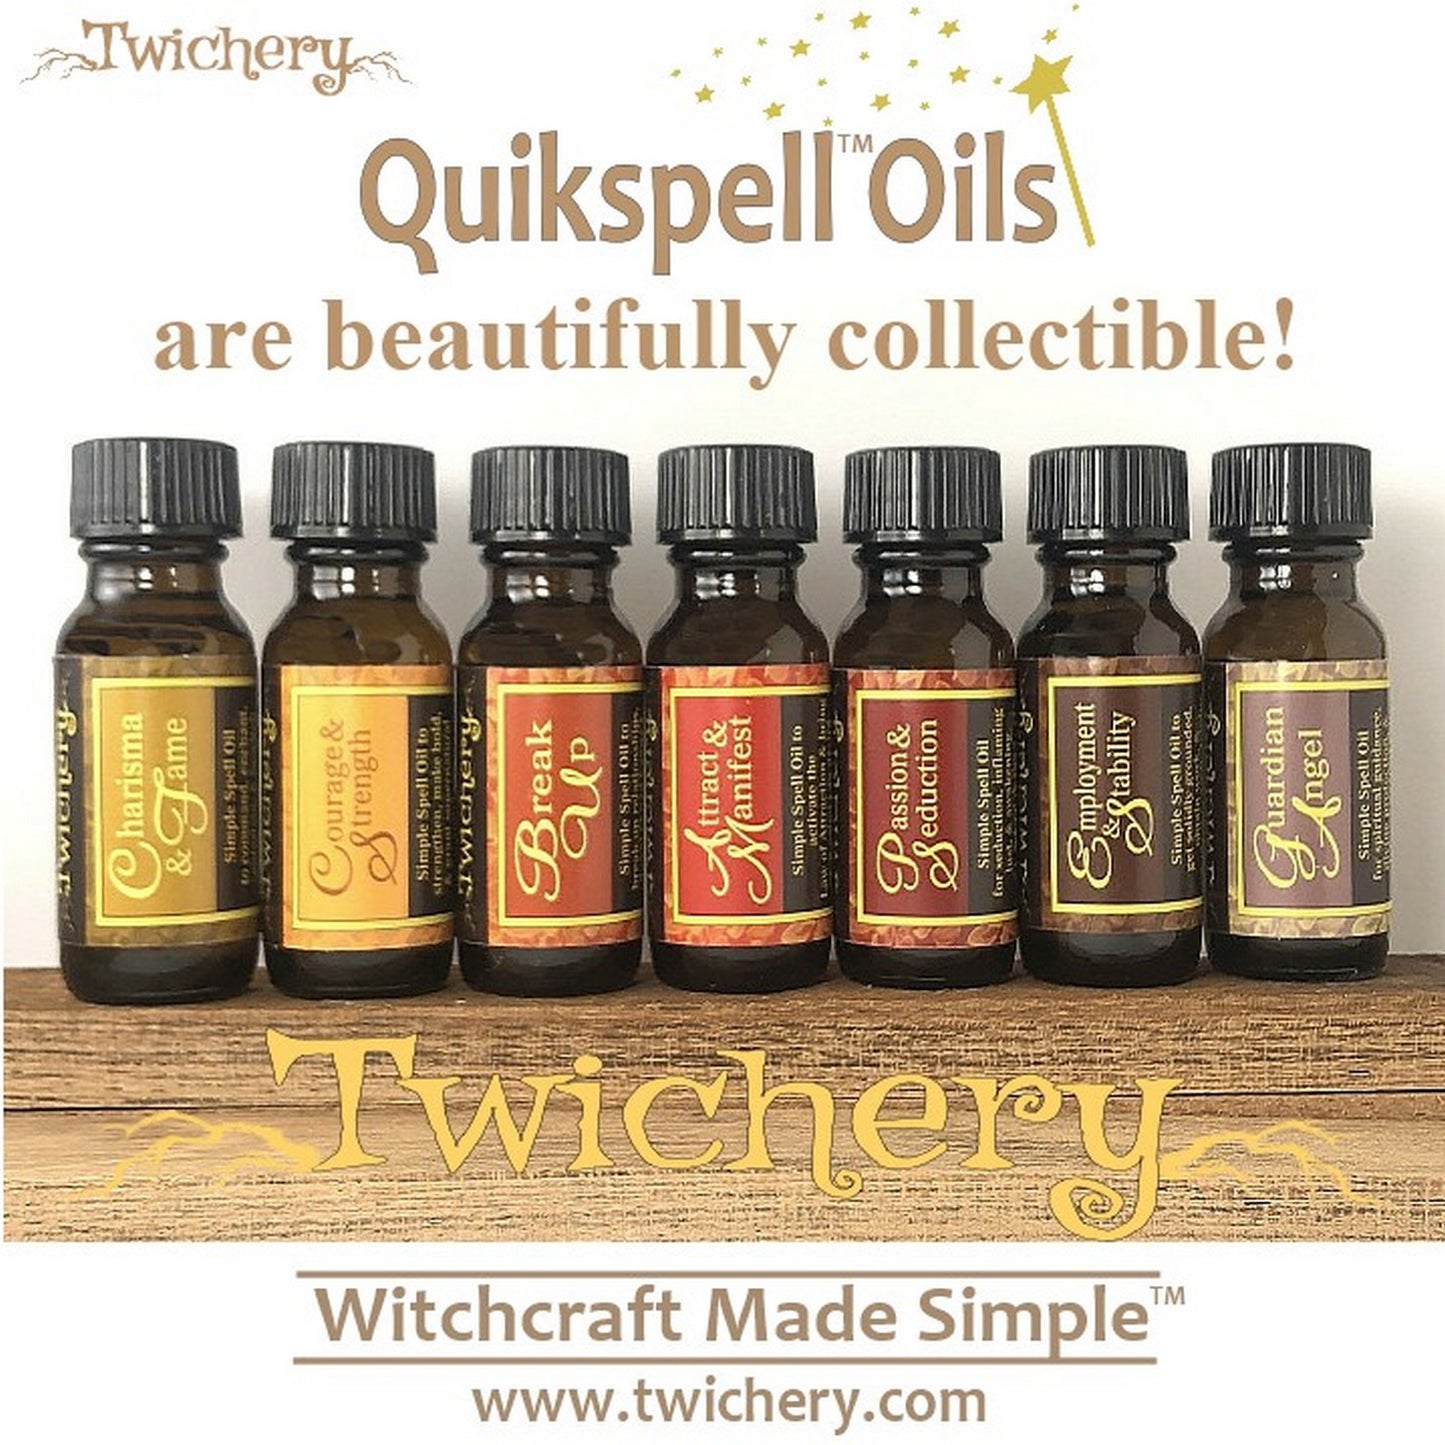 Collect all 24 Twichery Quikspell Oils for all your magickal needs, including Healing & Grace! Hoodoo, Voodoo, Wicca, Witchcraft Made Simple